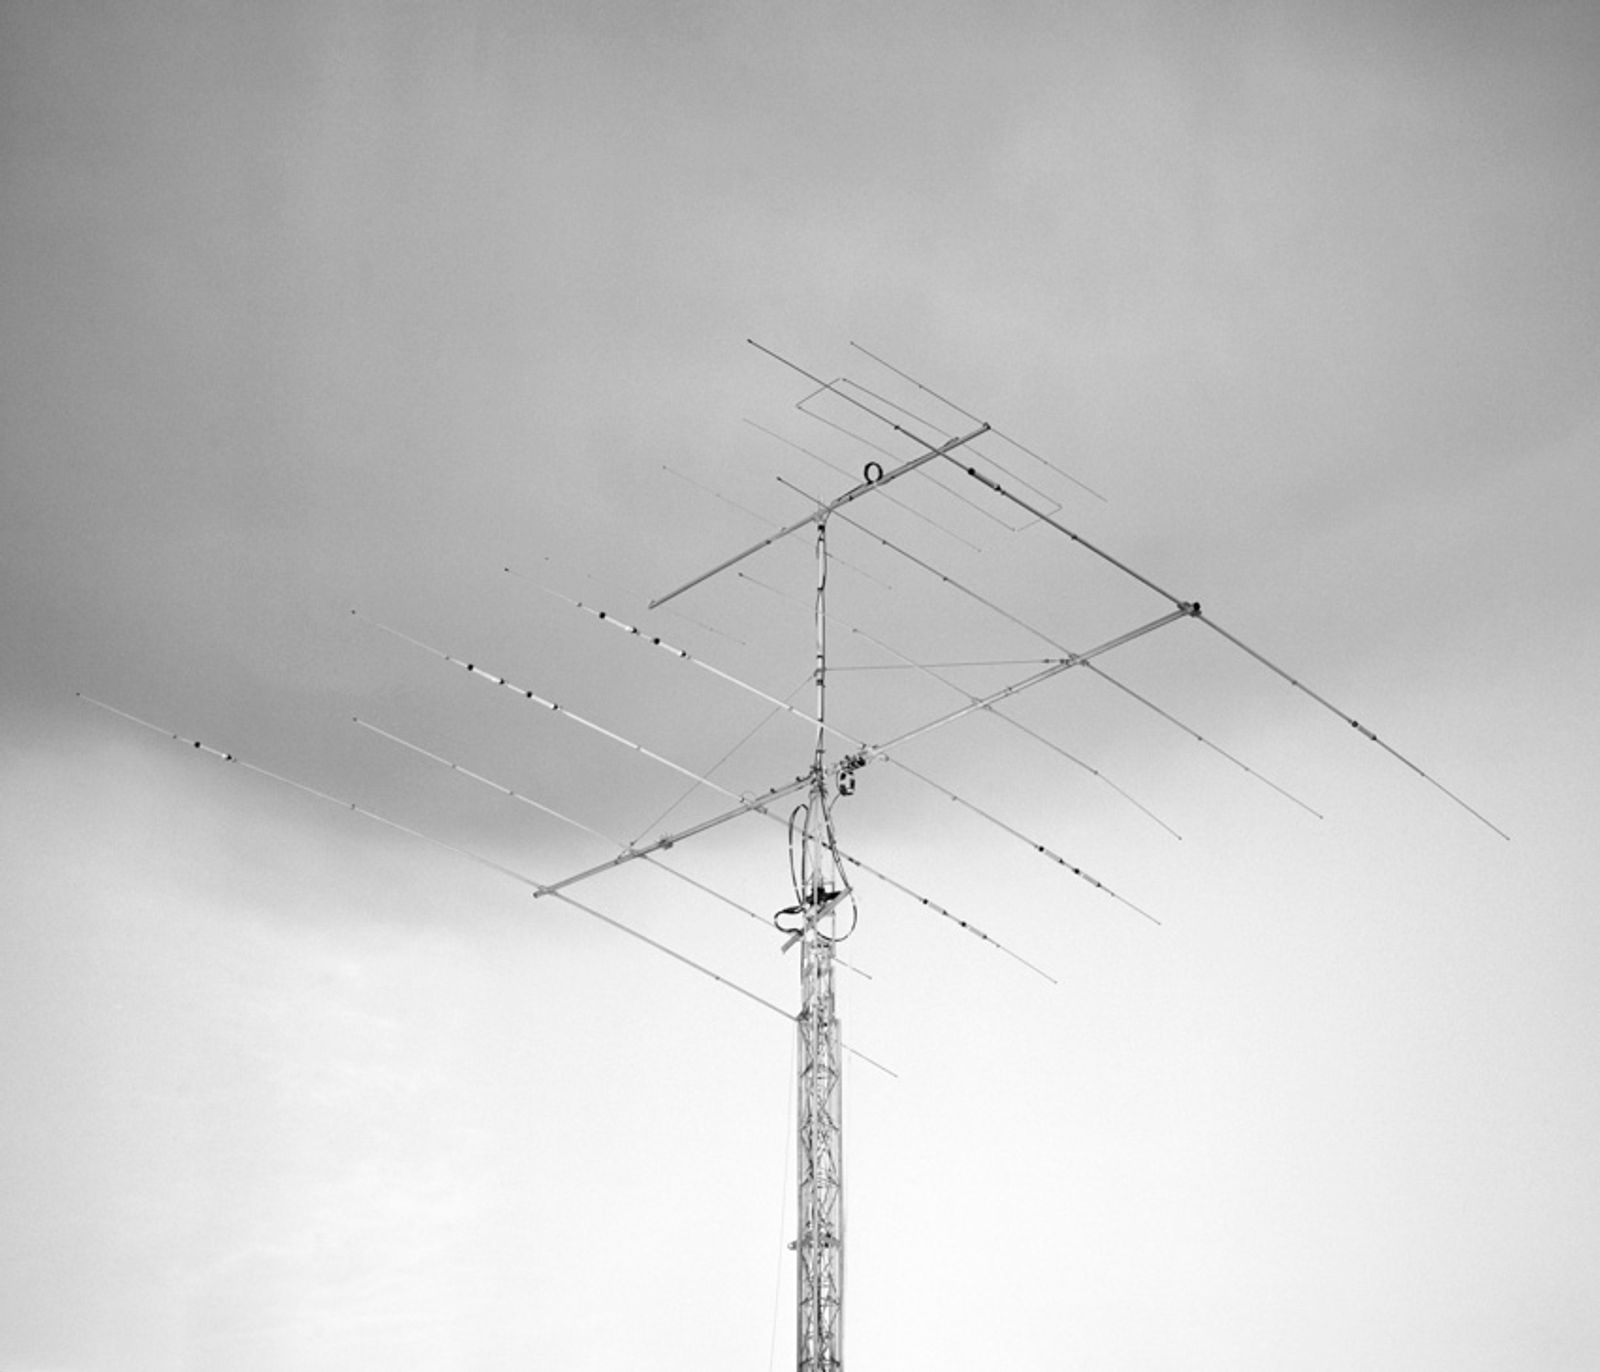 © Luke Withers - Image from the Wireless photography project